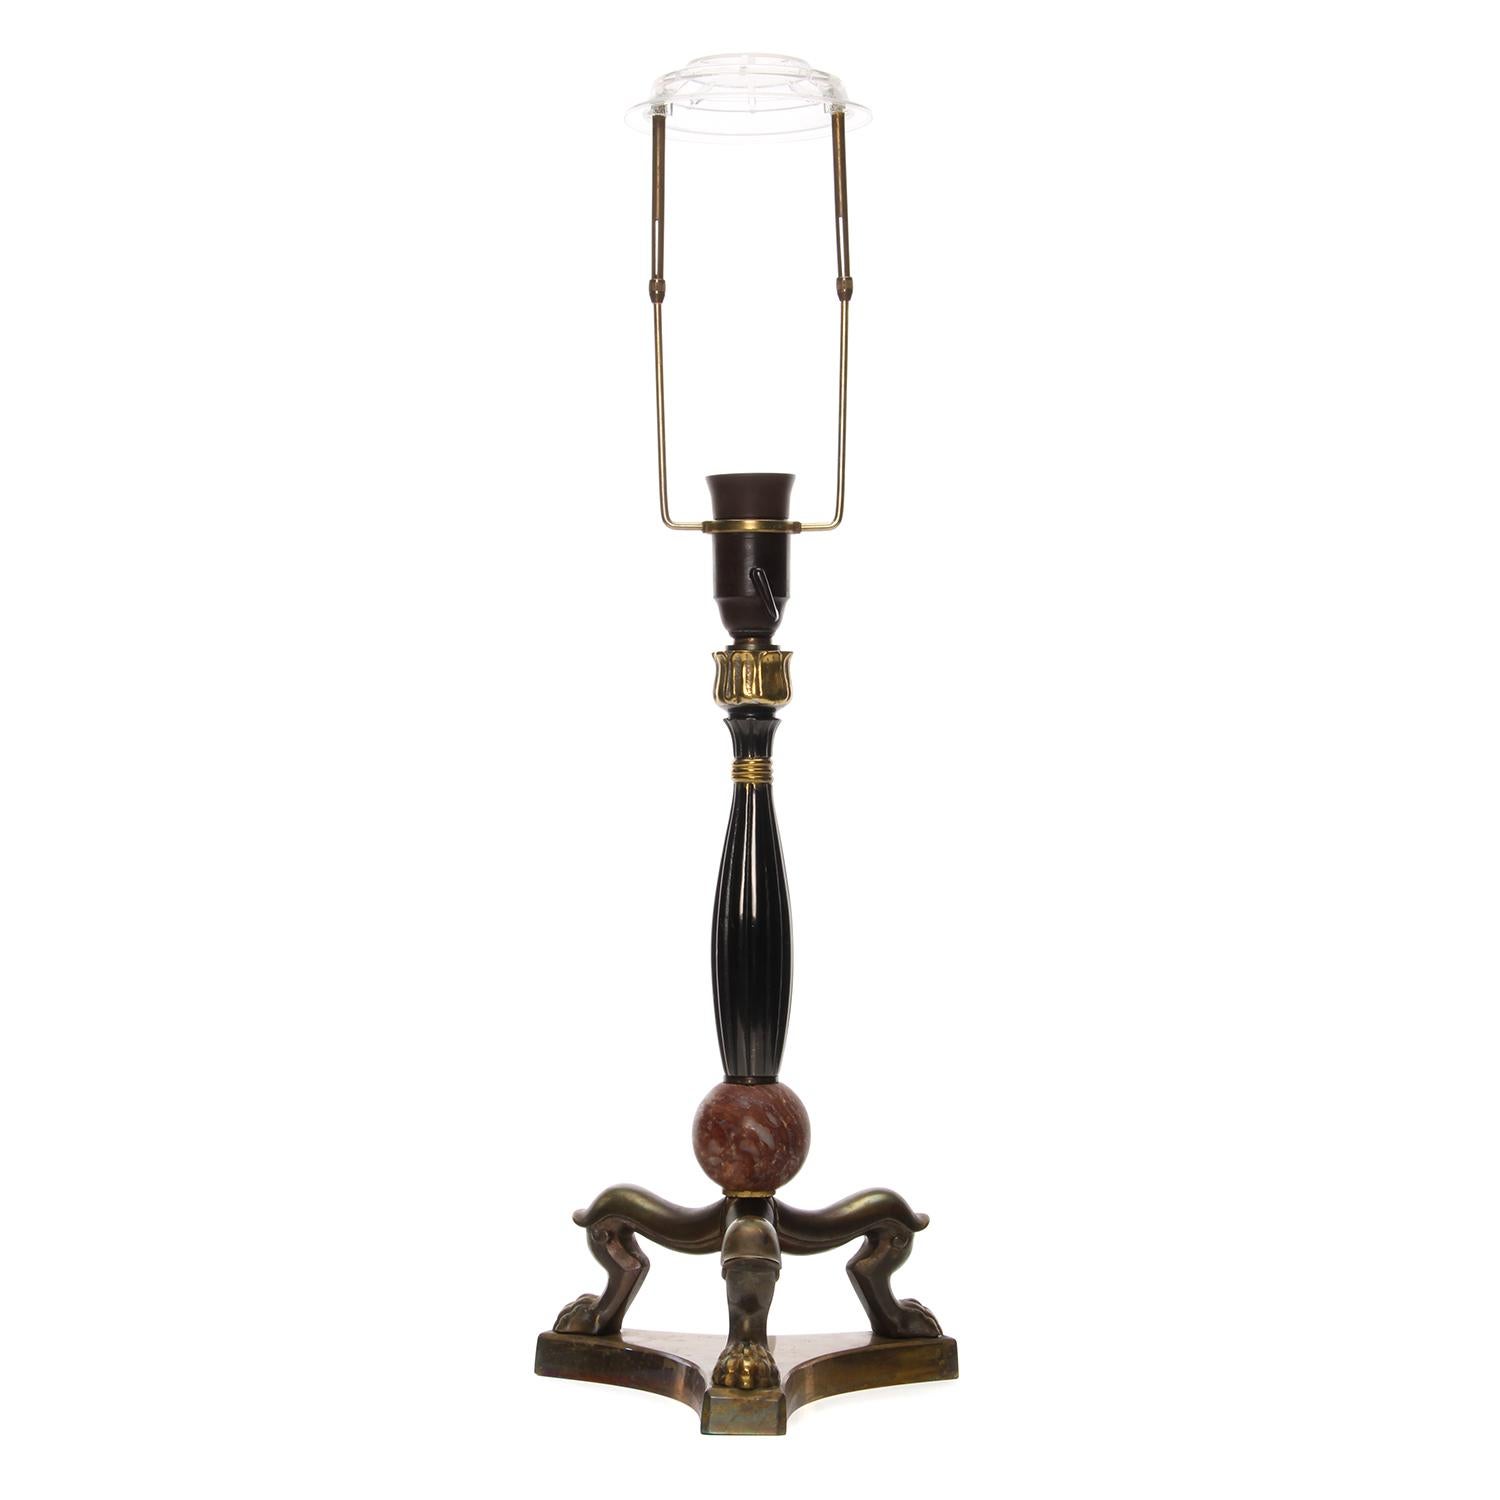 Mid-20th Century Brass Table Lamp 1940s Empire Style Brass Table Light with Lion-Claw Feet